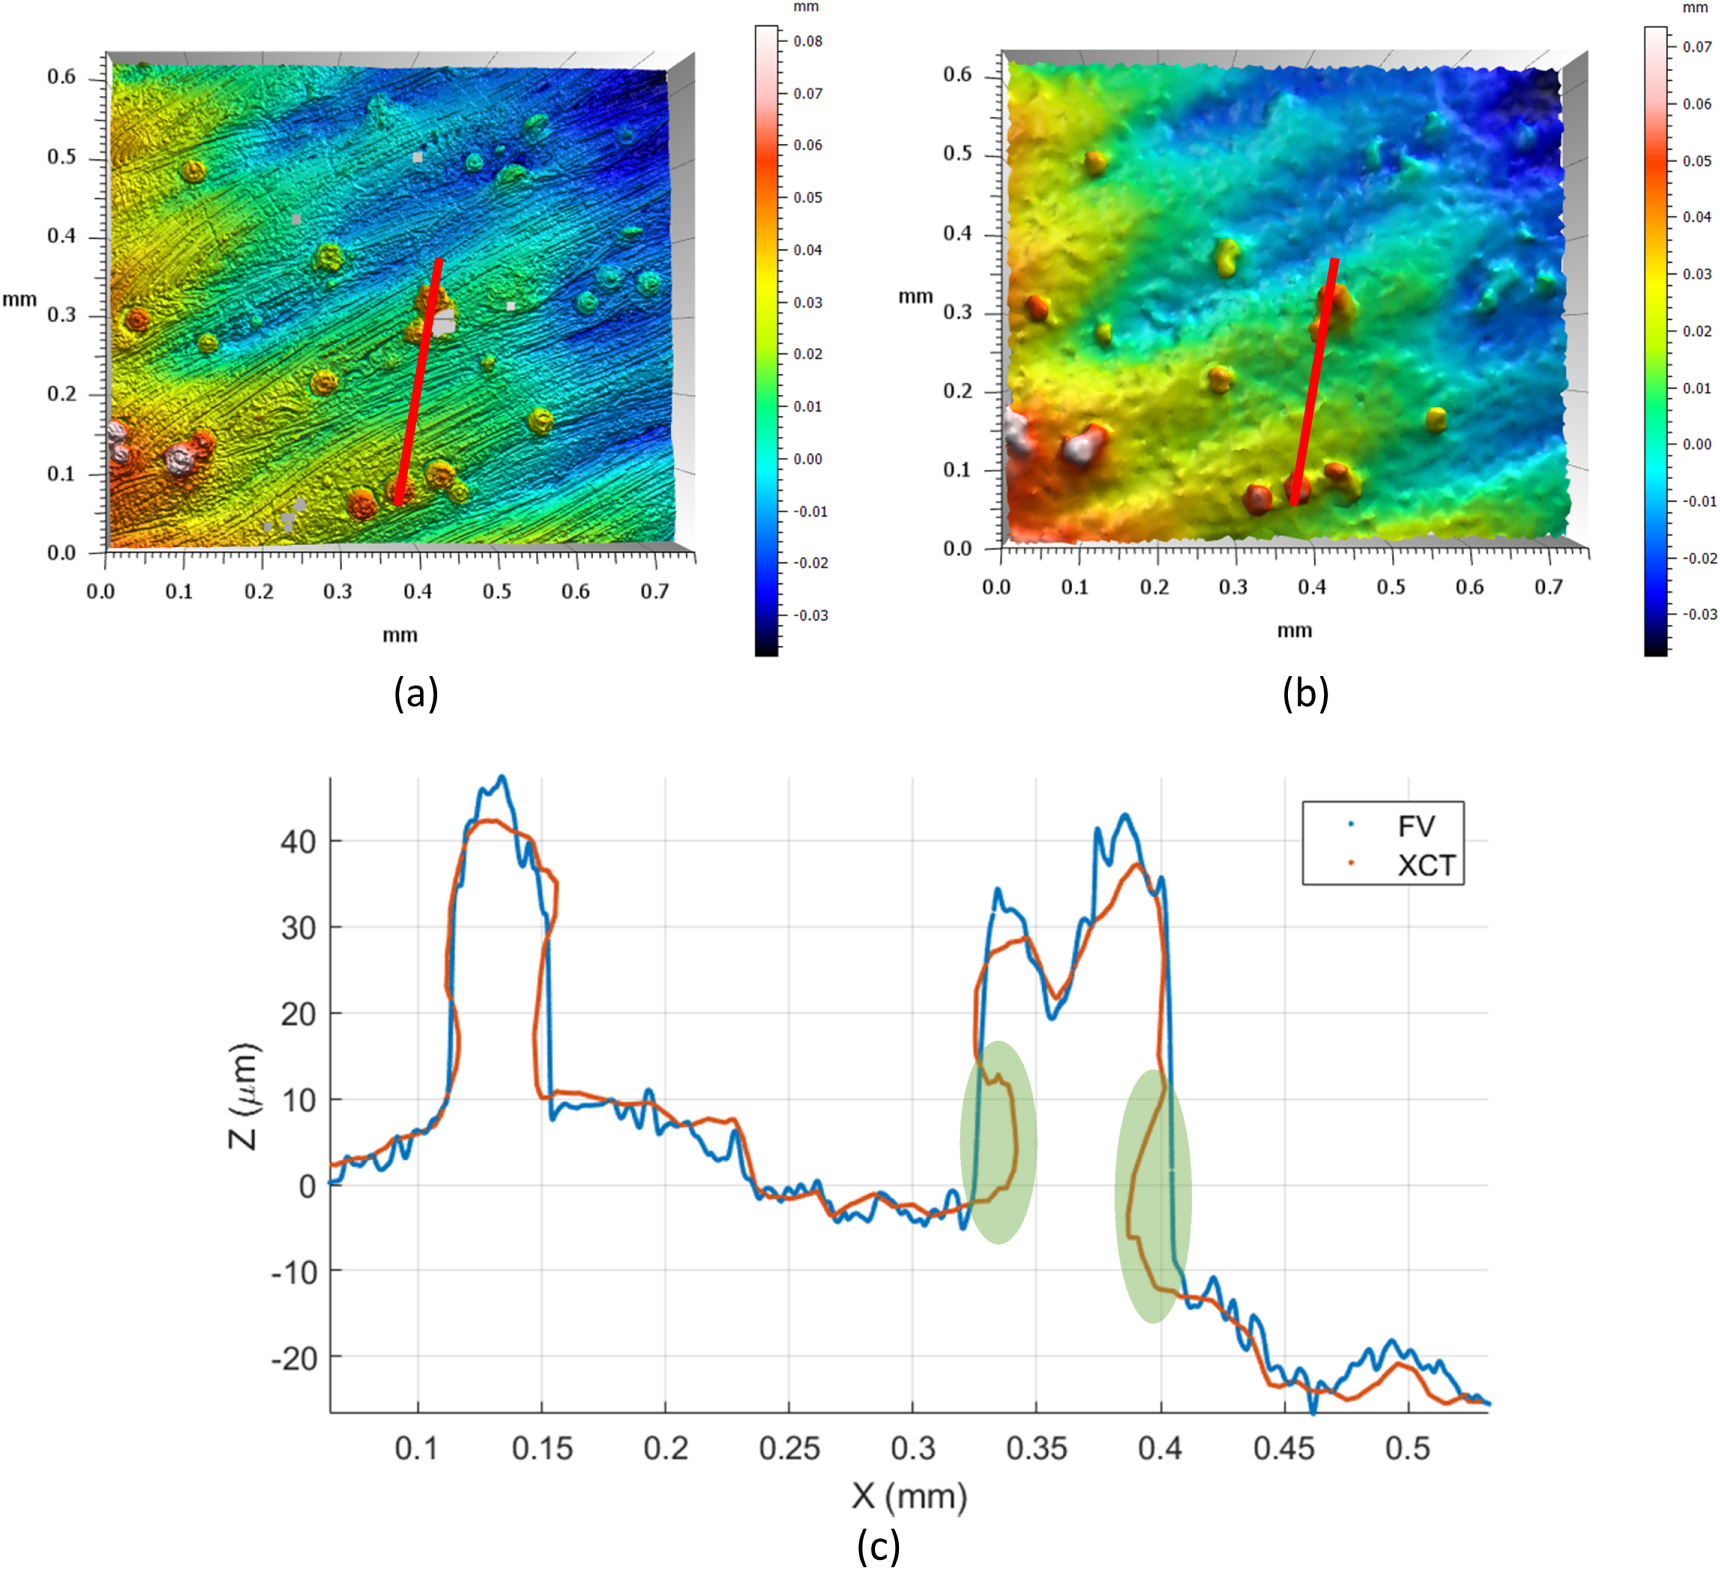 SLM surface topography measured by: (a) FV microscope; (b) XCT; (c) profile comparison of selected cross-section profiles. From Material ratio curve of 3D surface topography of additively manufactured parts: an attempt to characterise open surface pores - SLM surface topography measured by: (a) FV microscope; (b) XCT; (c) profile comparison of selected cross-section profiles.Lou, S., et.al., 2021. Material ratio curve of 3D surface topography of additively manufactured parts: an attempt to characterise open surface pores. Surface Topography: Metrology and Properties, Volume 9, Number 1  Attribution 4.0 International (CC BY 4.0)